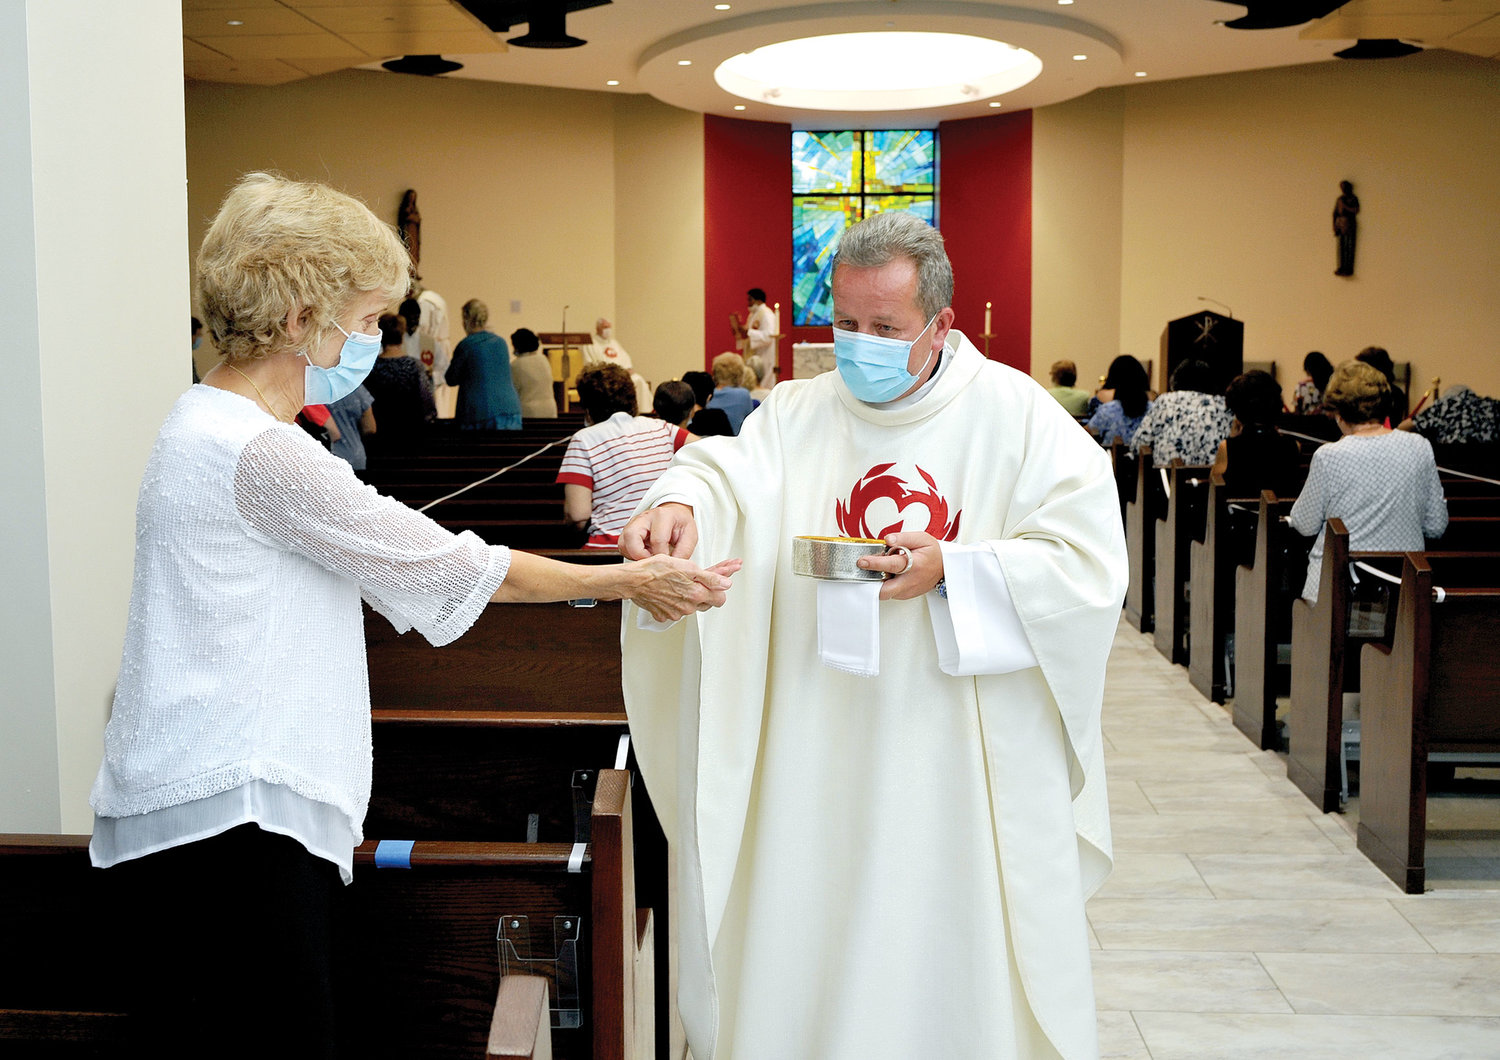 Father Vladimir Chripko, C.O., pastor of St. Paul-St. Ann parish and provost of the New York Oratory of St. Philip Neri, distributes Communion at a Mass celebrating the reopening of the renovated St. Paul’s Church in Congers Aug. 8.
Father Chripko also went outside to distribute the
Eucharist to the 50 people celebrating the Mass
outdoors as only 150 parishioners were permitted in
the 1,200-seat church due to social distancing as a
result of the coronavirus pandemic.